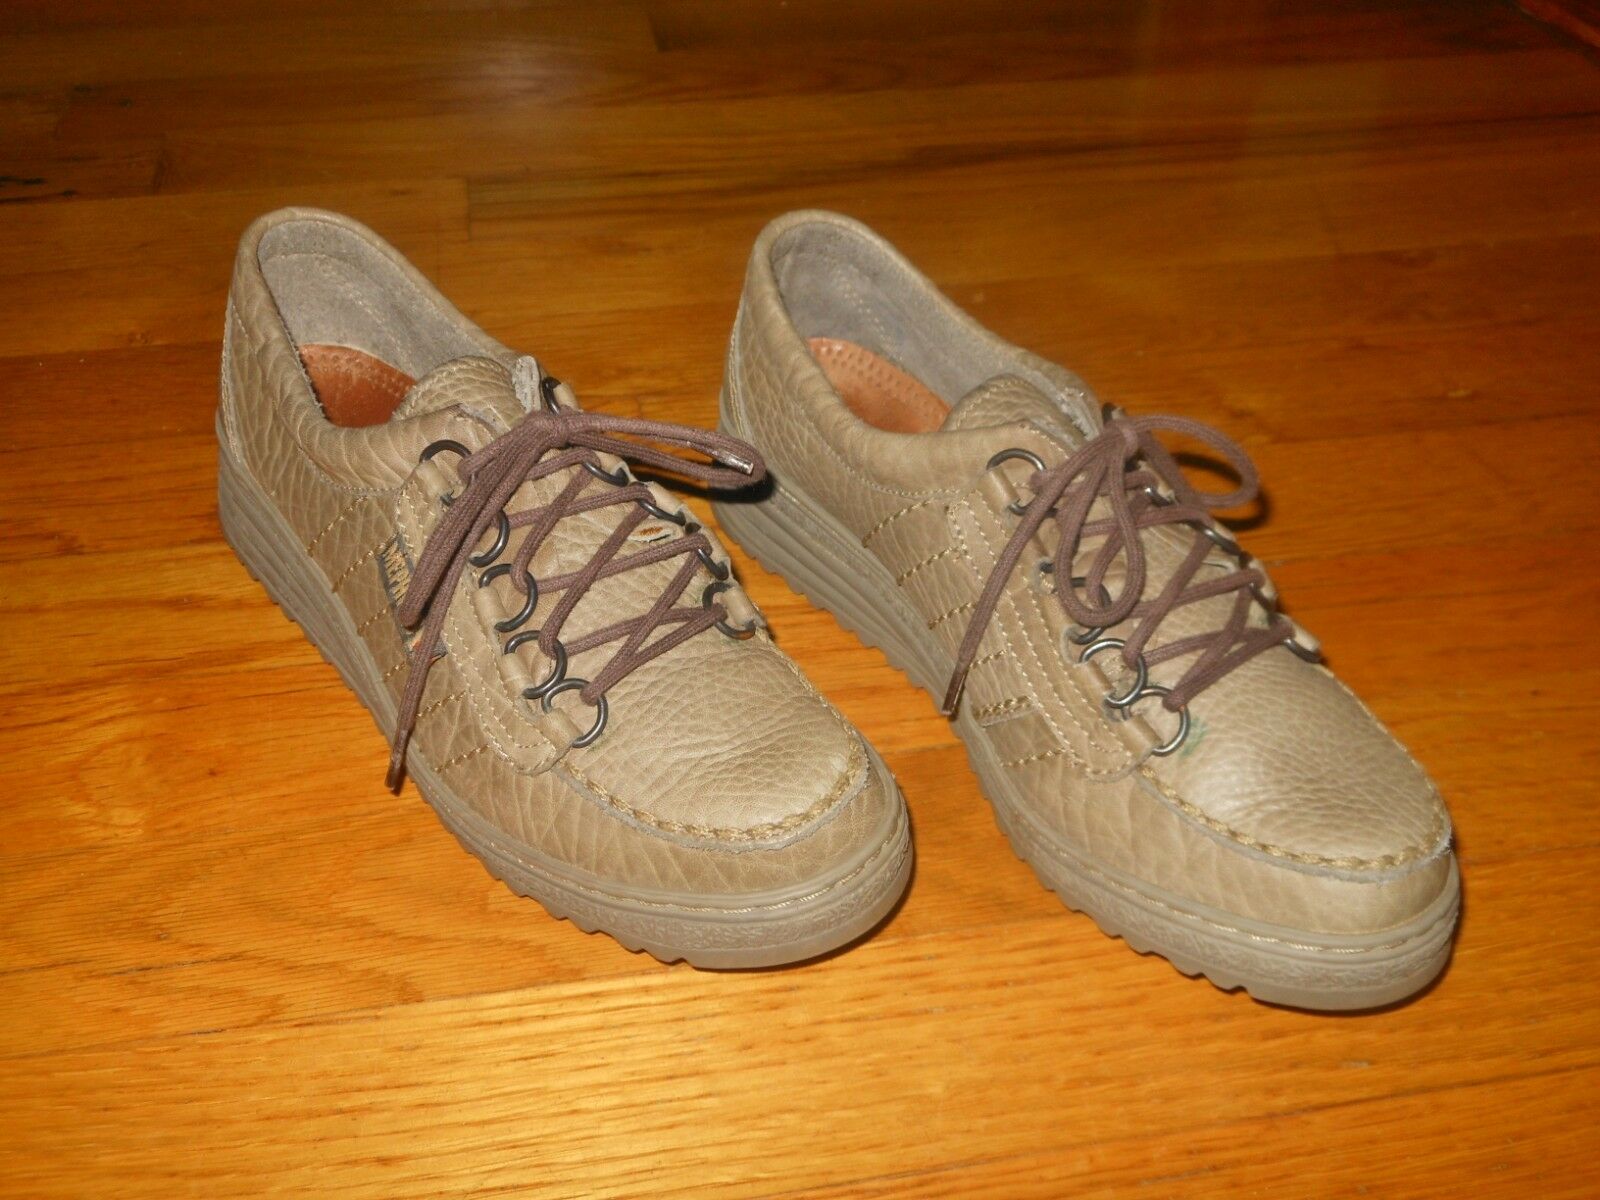 Mephisto women's leather walking shoes Sz 6.5 M Very good condition